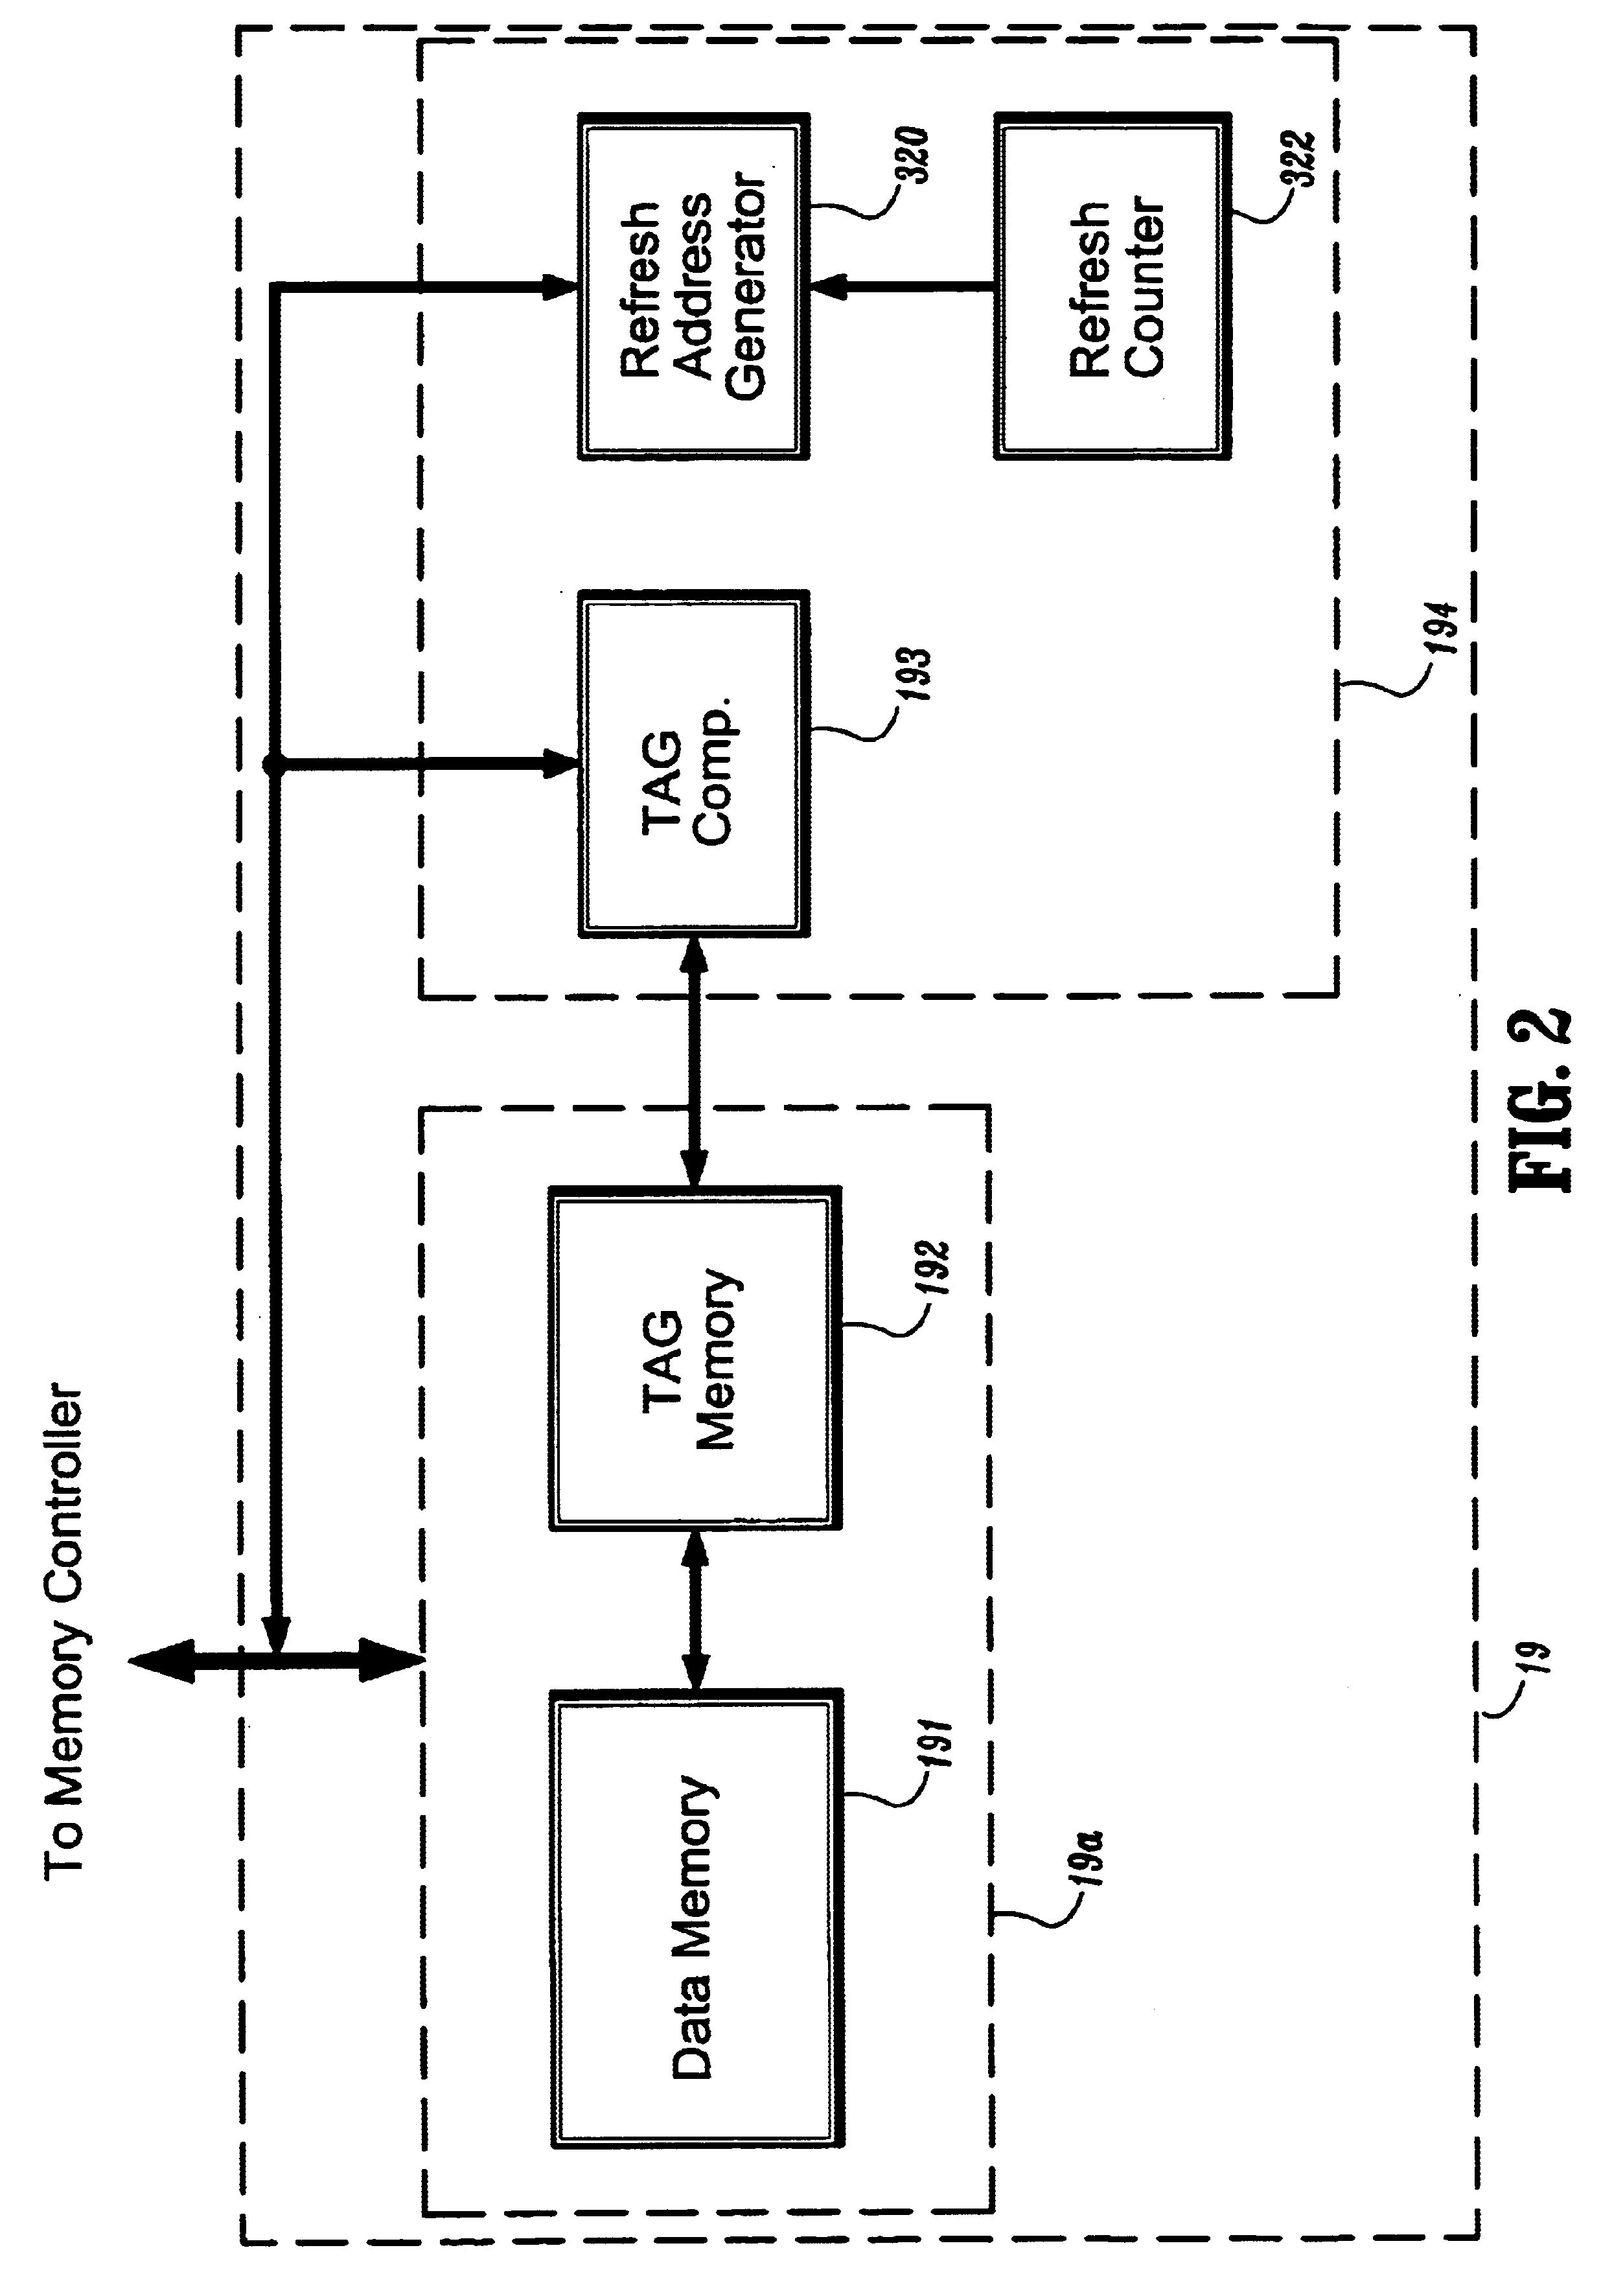 Method and apparatus for performing data access and refresh operations in different sub-arrays of a DRAM cache memory